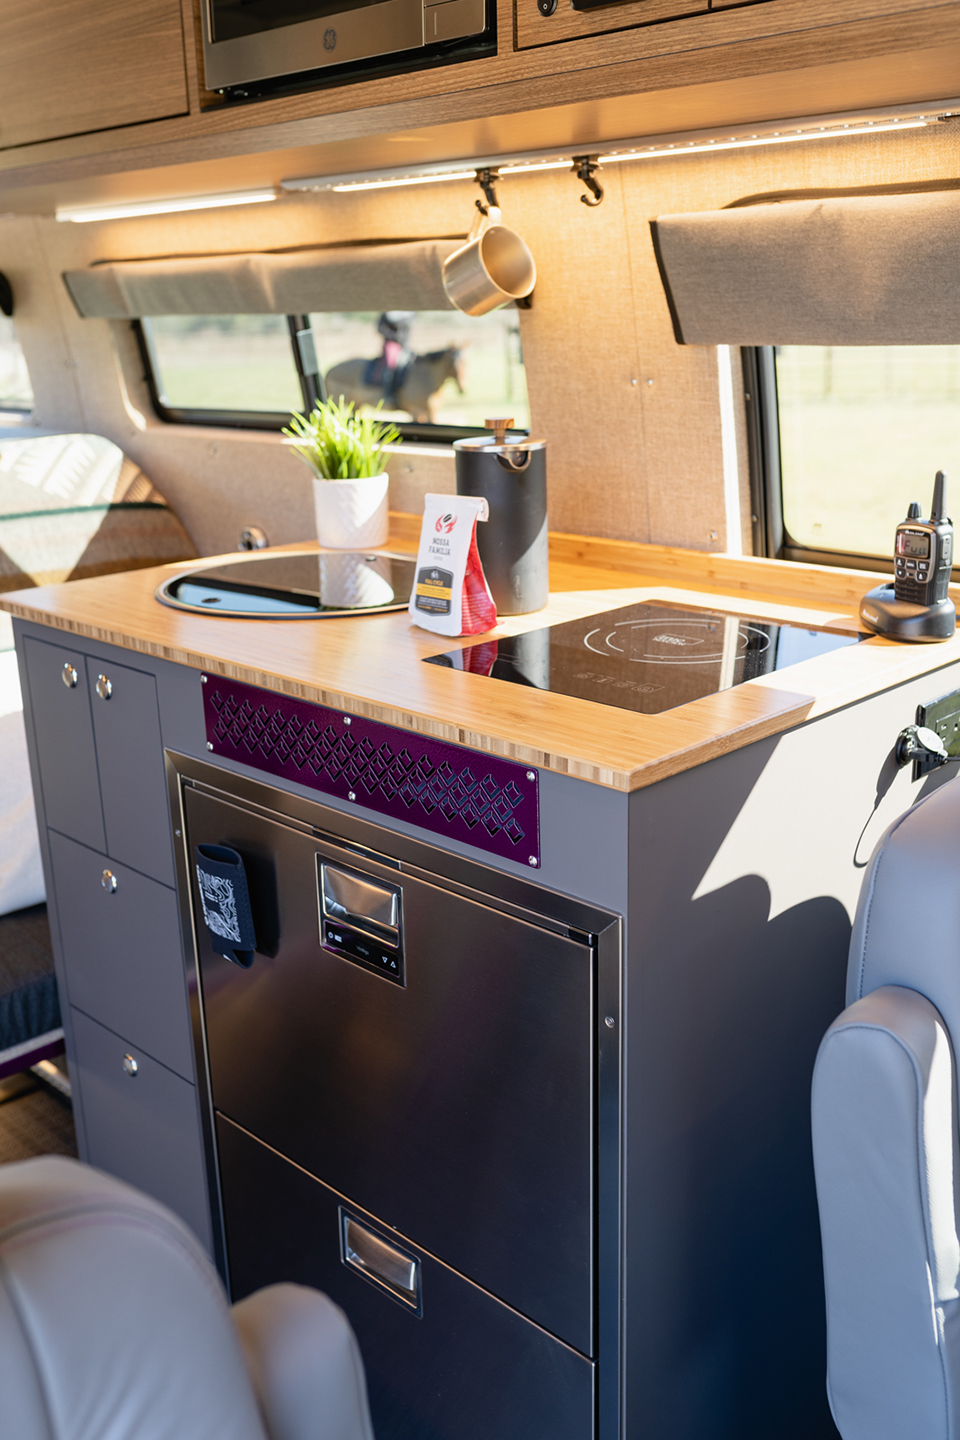 Driver-side galley kitchen featuring an induction stove, dual stainless steel refrigerator, drawers, sink, and faucet